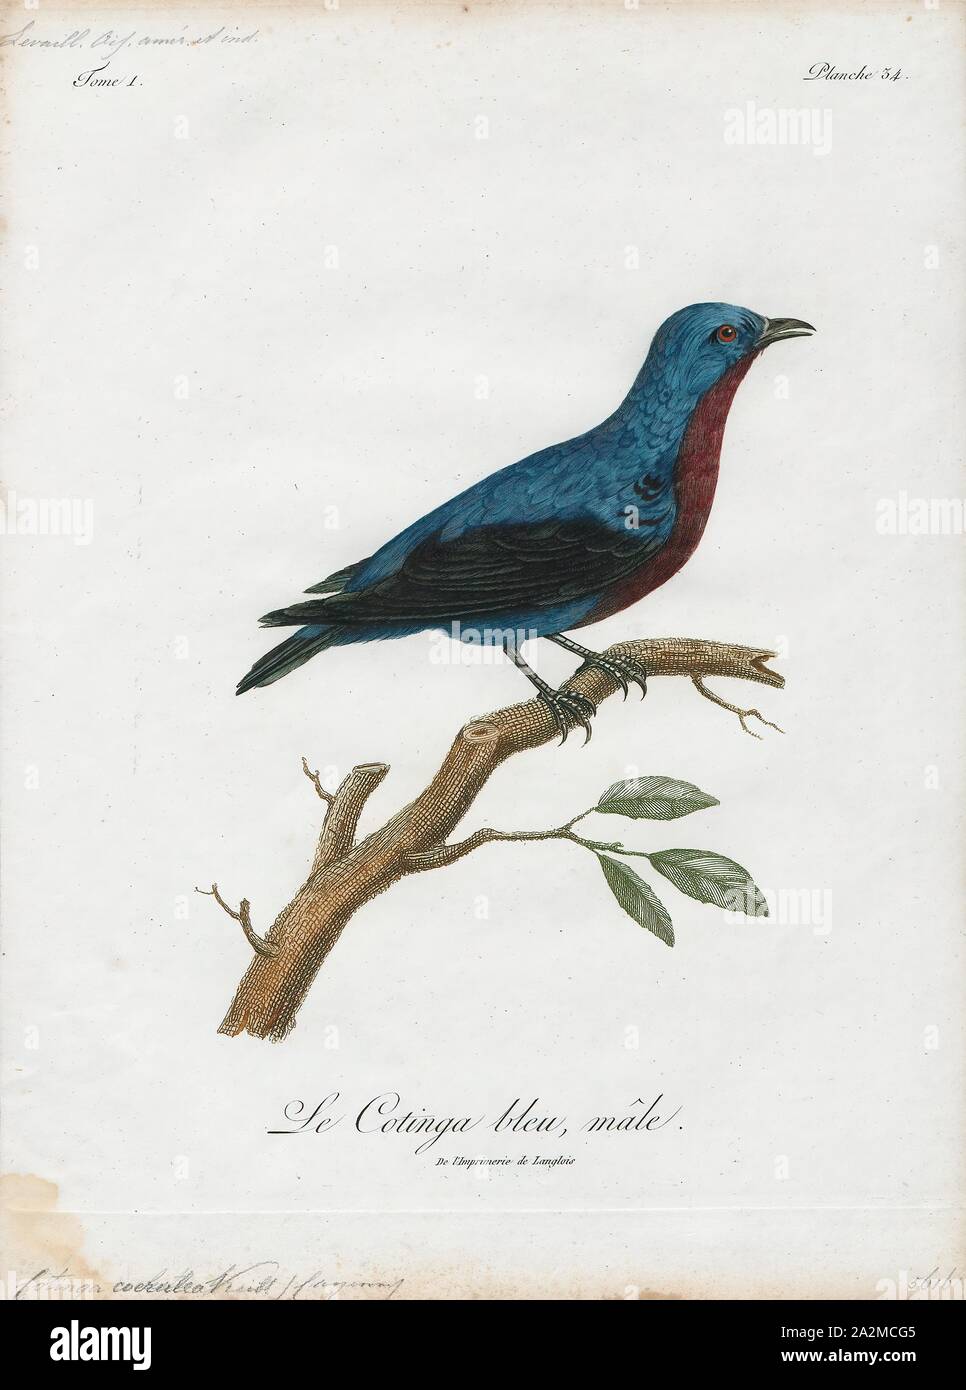 Cotinga caerulea, Print, The cotingas are a large family, Cotingidae, of suboscine passerine birds found in Central America and tropical South America. Cotingas are birds of forests or forest edges, that are primary frugivorous. They all have broad bills with hooked tips, rounded wings, and strong legs. They range in size from 12–13 cm (4.7–5.1 in) of the fiery-throated fruiteater (Pipreola chlorolepidota) up to 48–51 cm (19–20 in) of the Amazonian umbrellabird (Cephalopterus ornatus)., 1801 Stock Photo